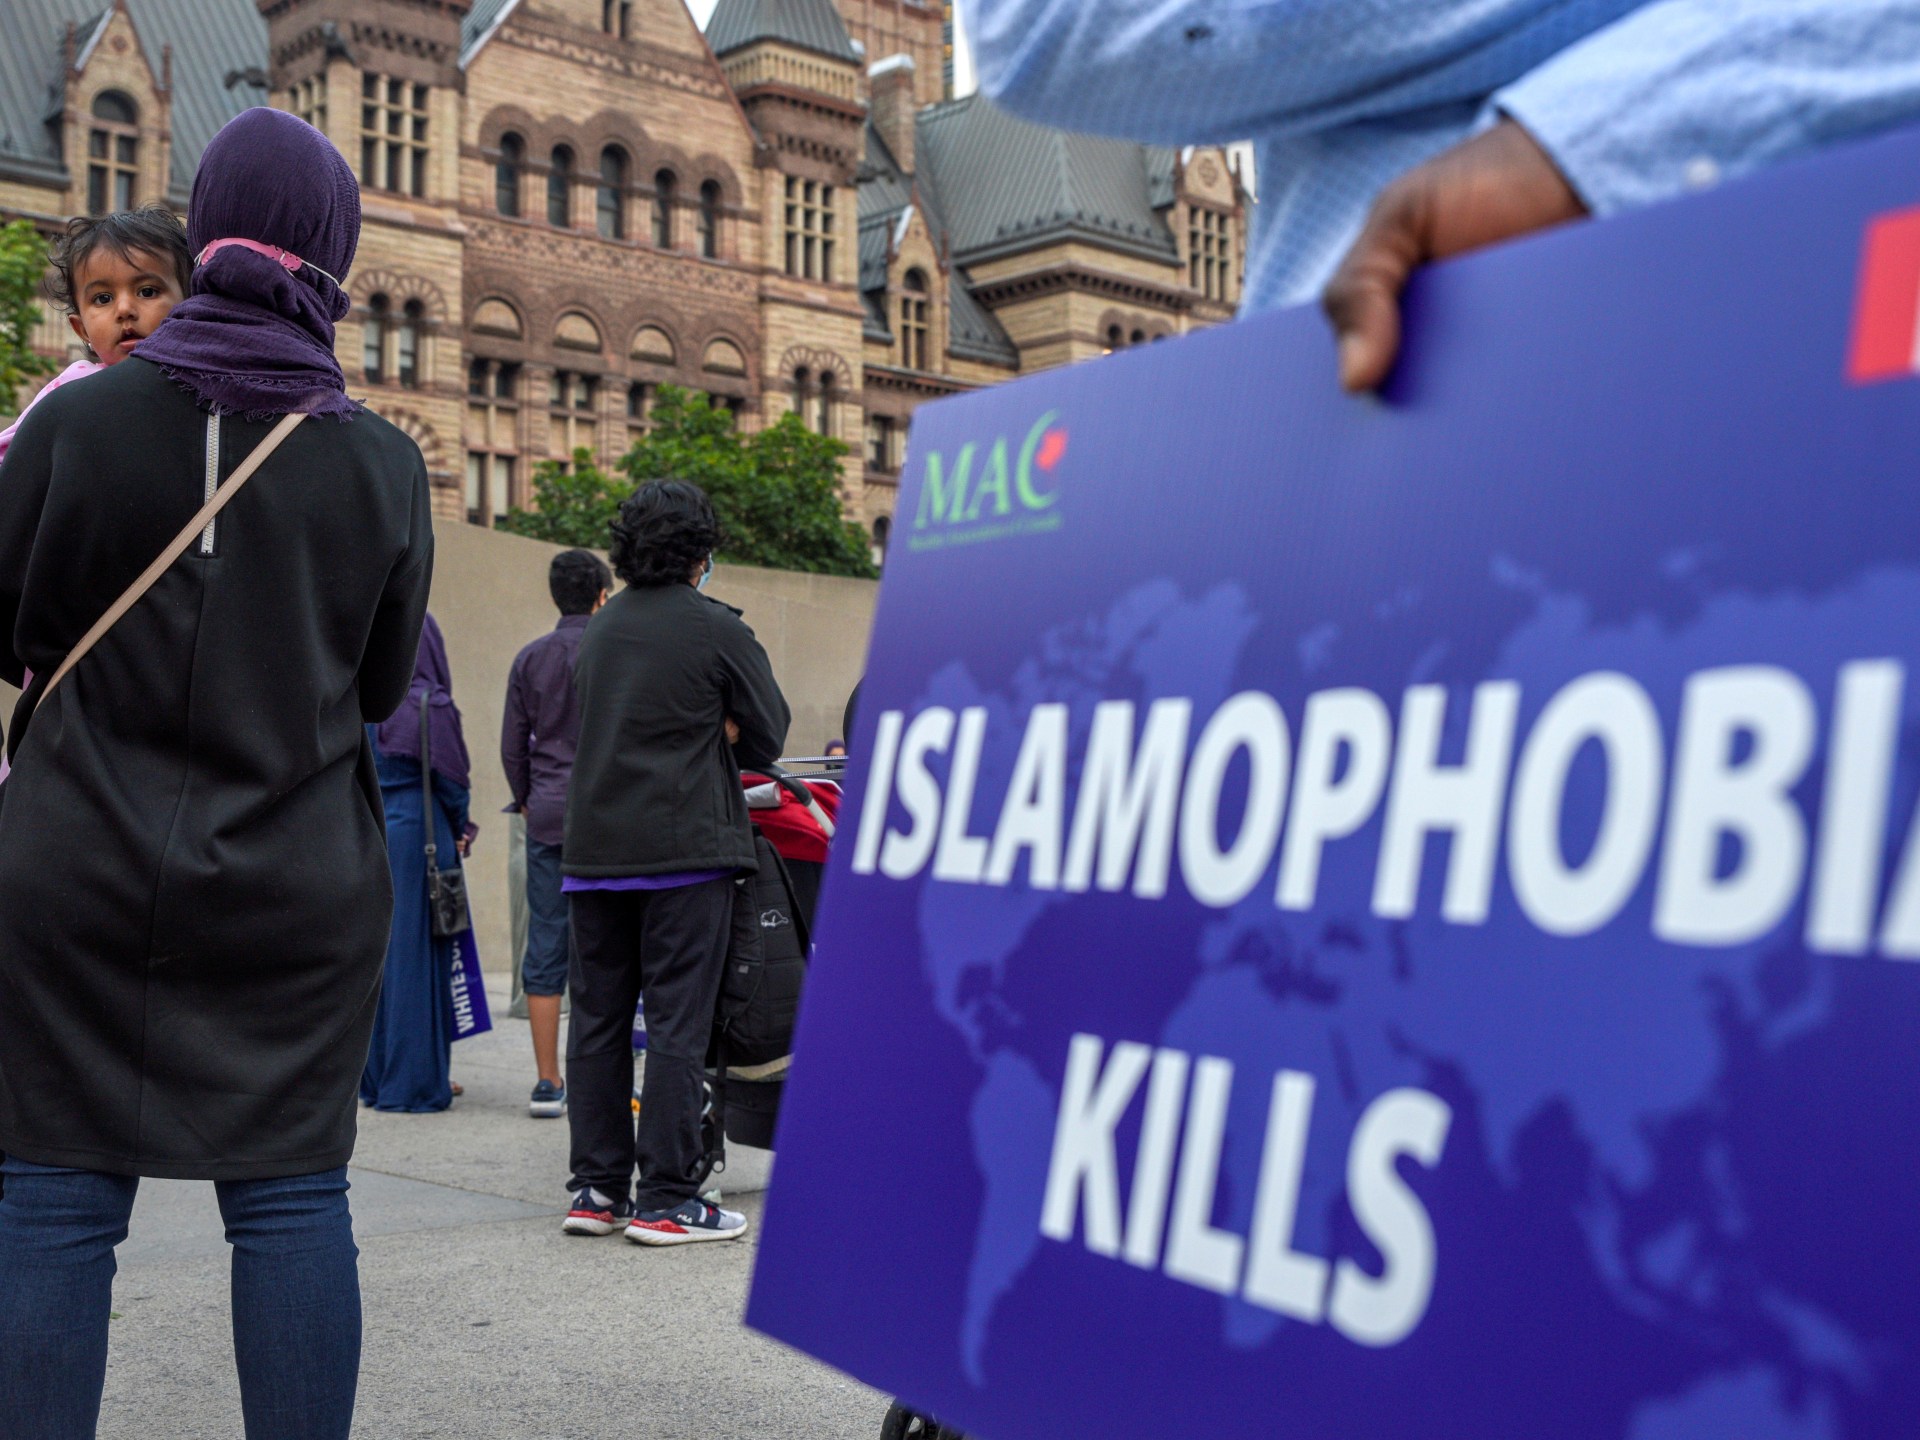 Canada appoints first representative to fight Islamophobia